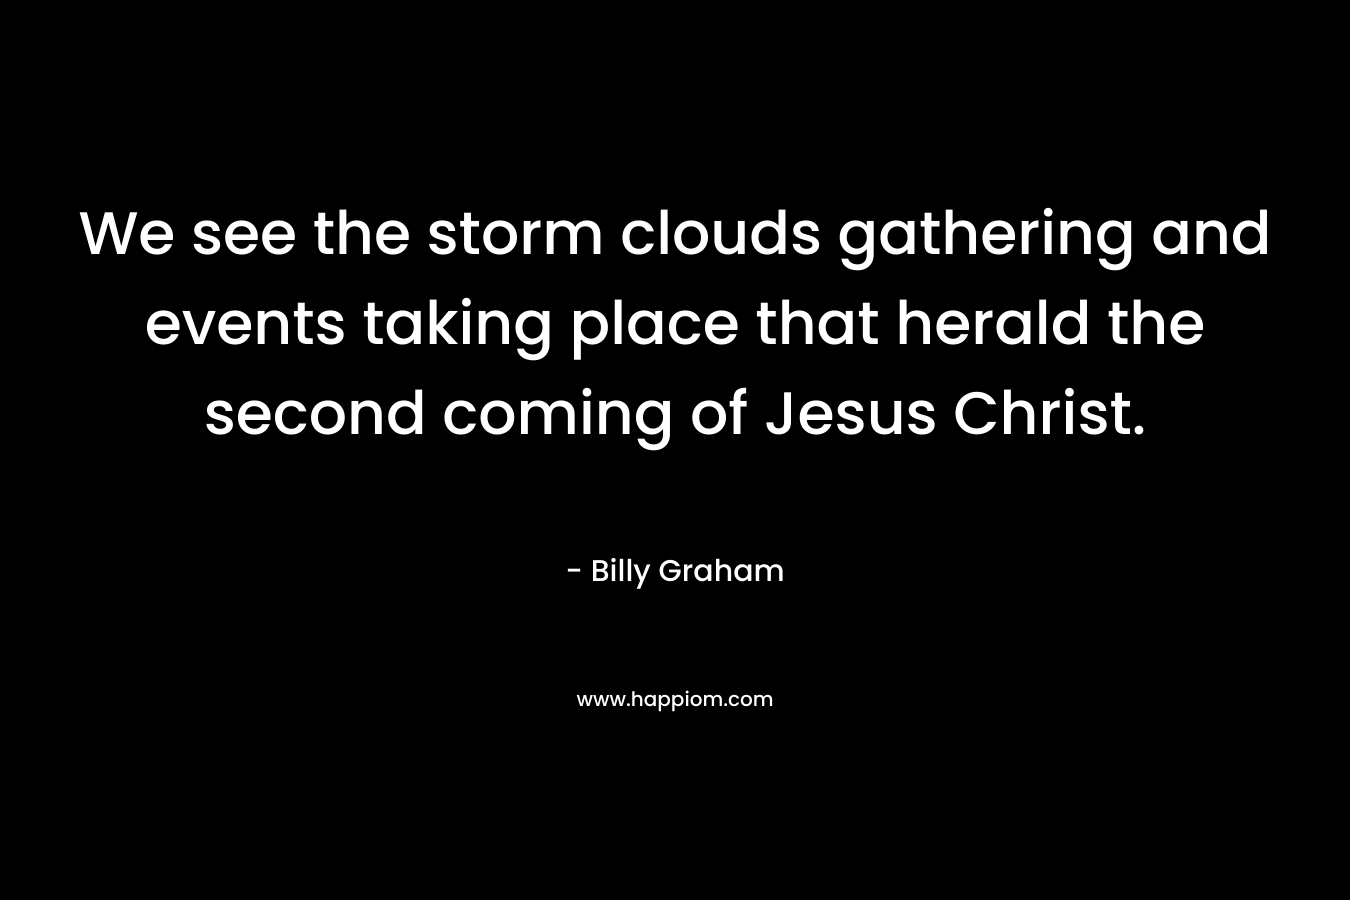 We see the storm clouds gathering and events taking place that herald the second coming of Jesus Christ. – Billy Graham